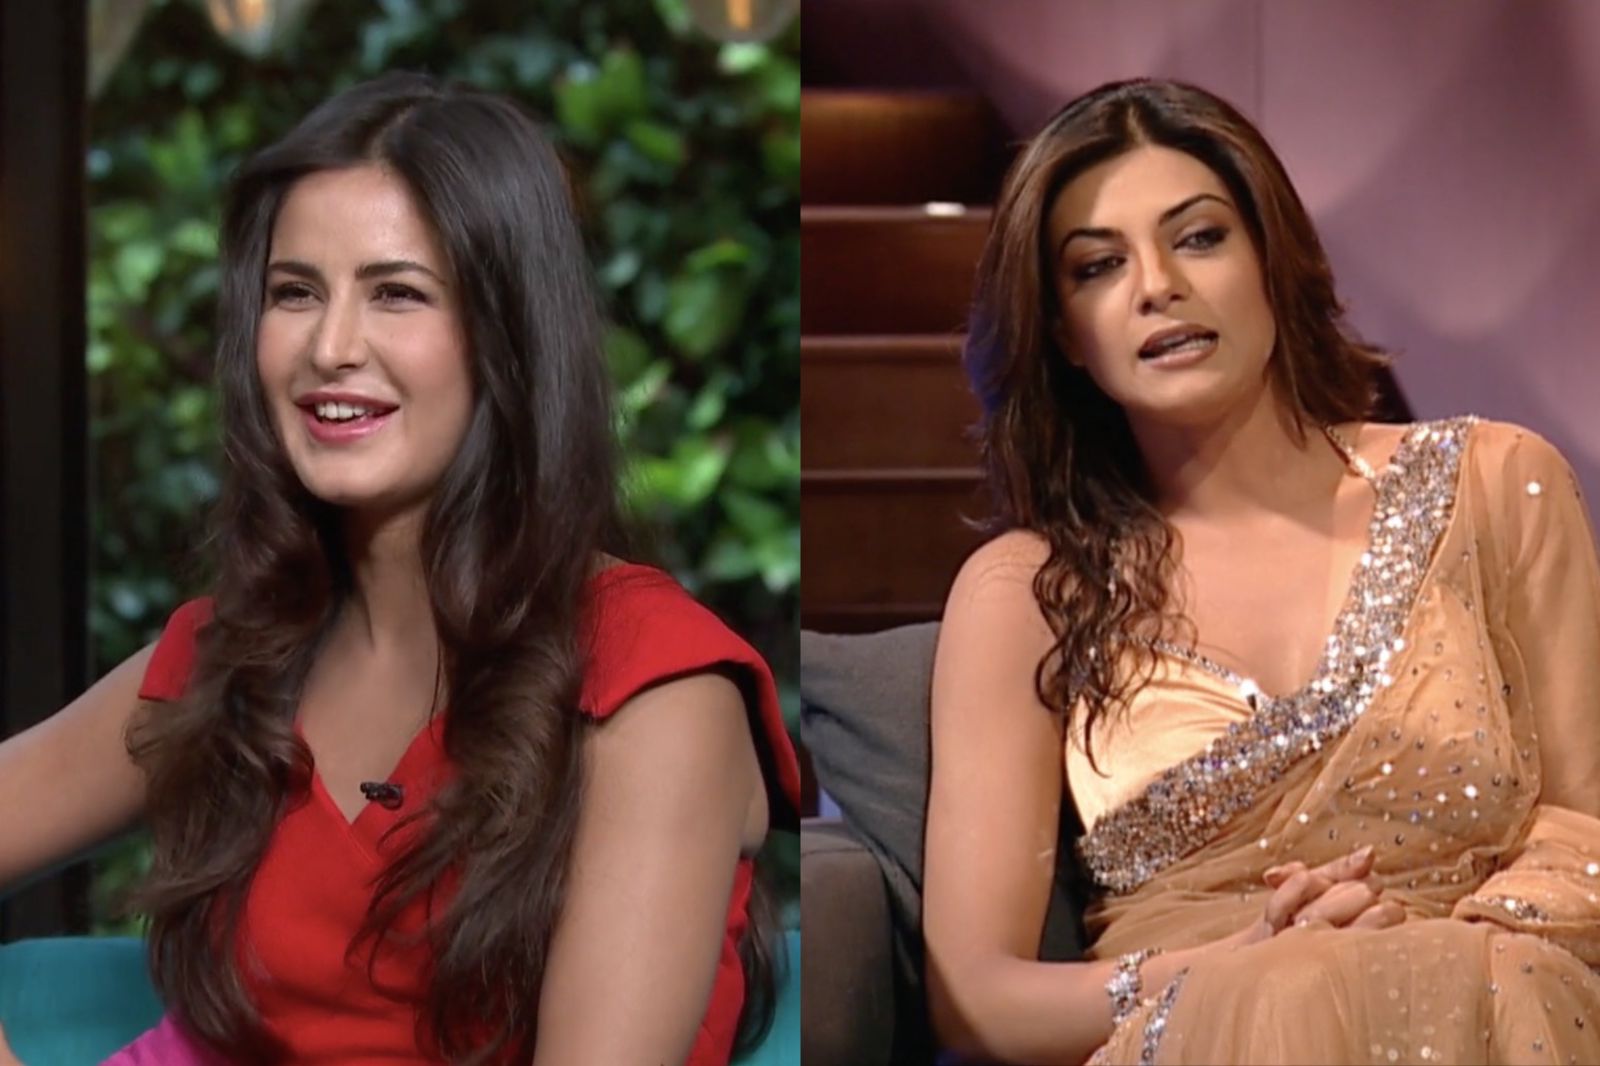 Koffee With Karan Season 7 Here Are 9 Lipstick Moments From The Show We’re Still Dreaming Of